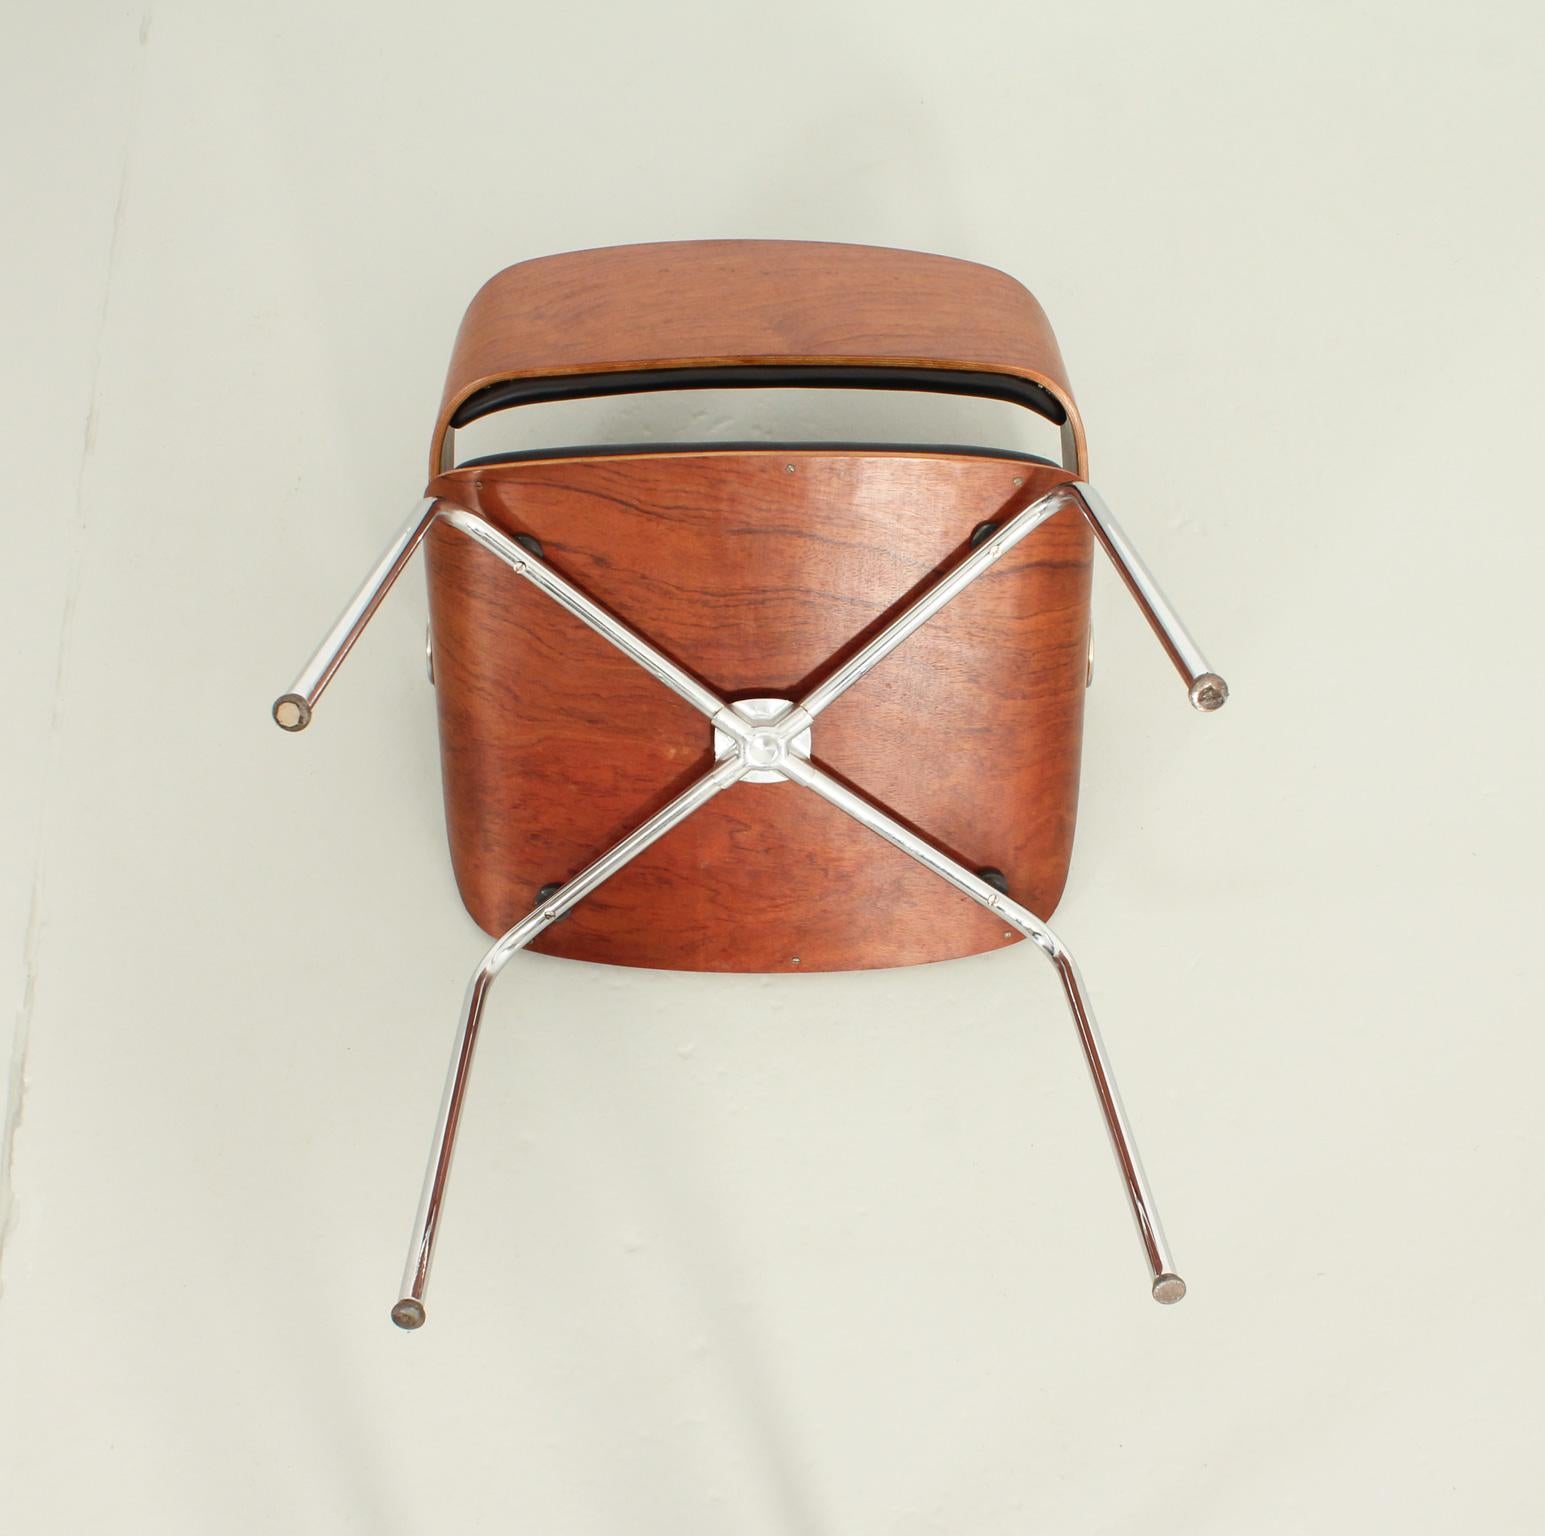 Leather Dining or Working Chair by Eugen Schmidt, Germany, 1965